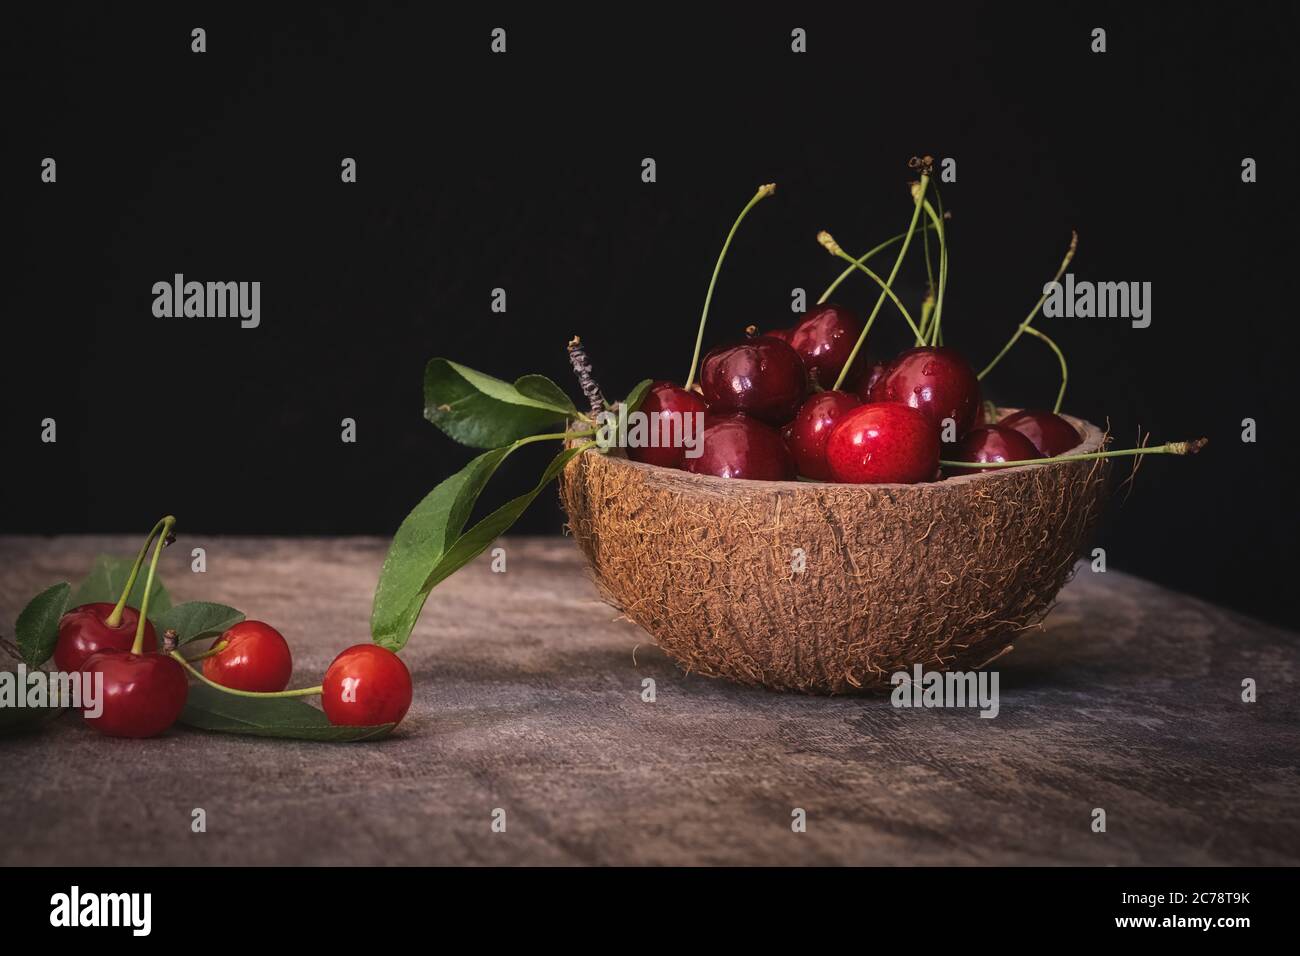 Fresh cherries in a coconut shell bowl on a wooden table on black background. Healthy eating. Stock Photo